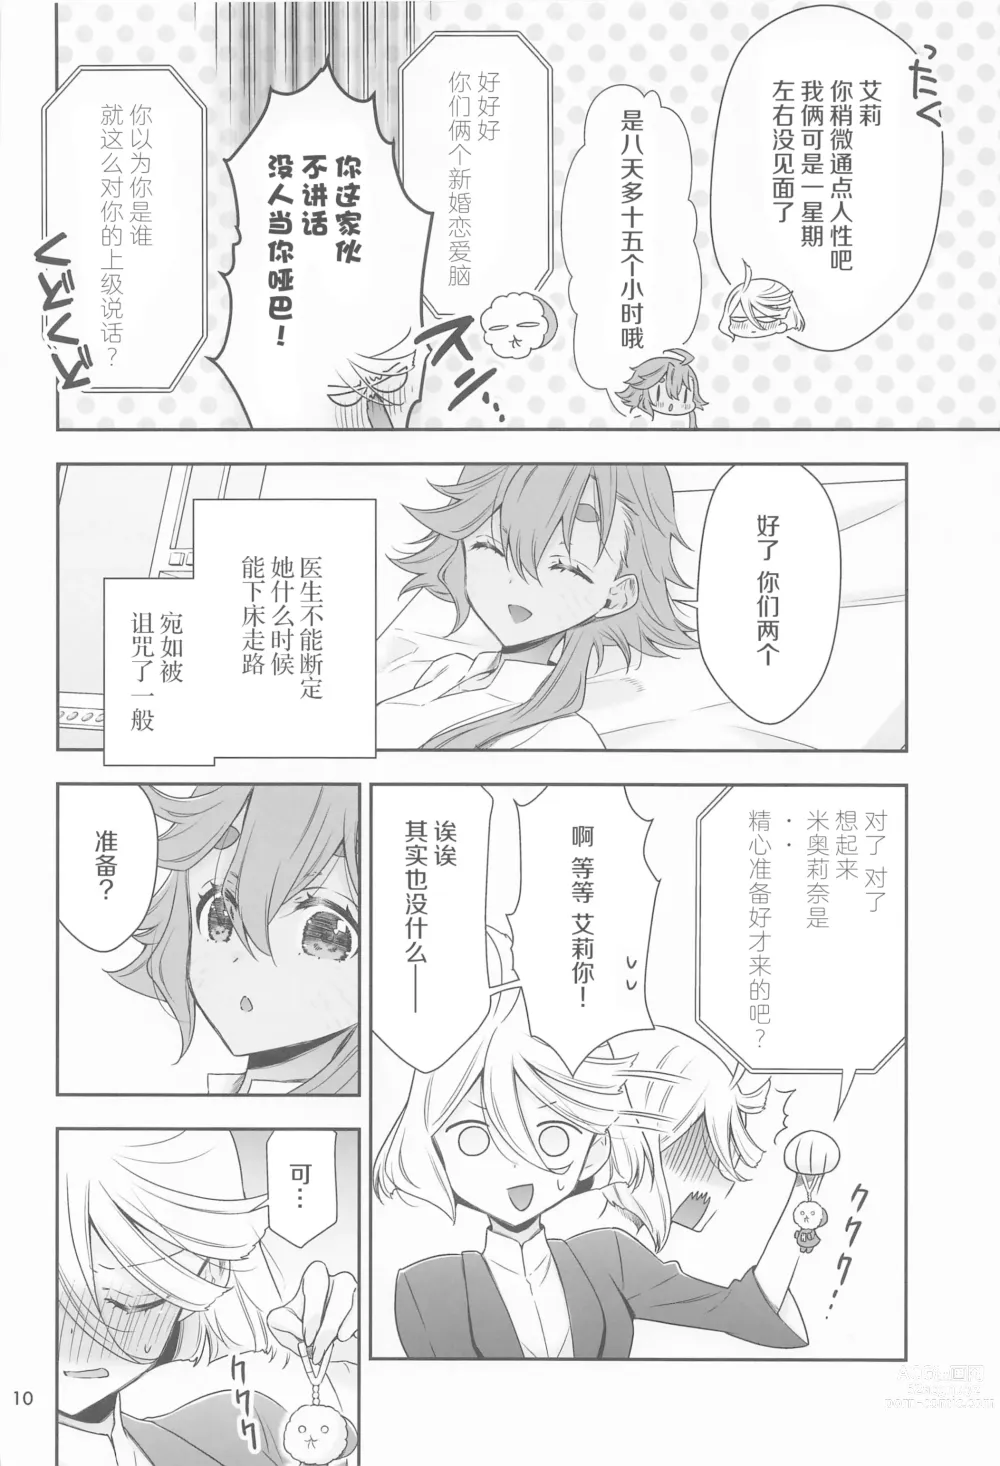 Page 10 of doujinshi 祝福之日